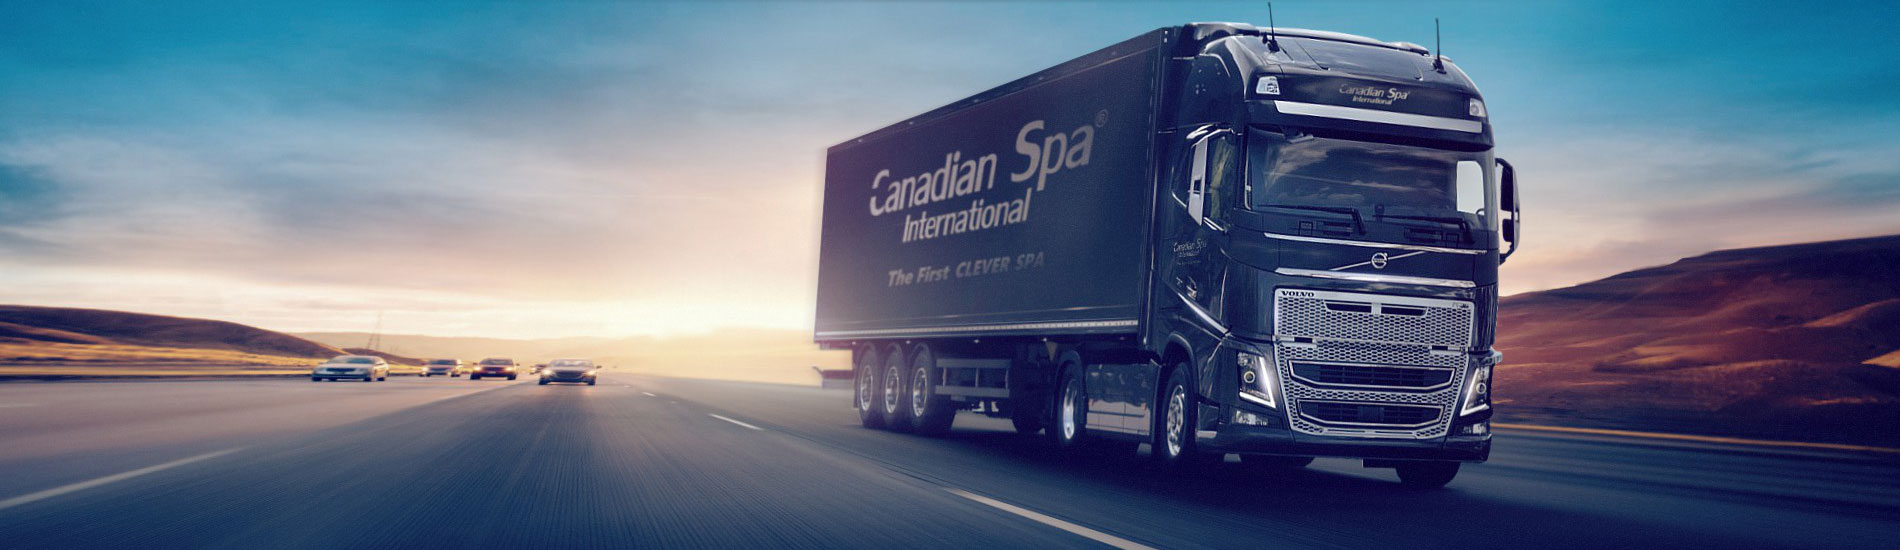 Canadian Spa International® - The First CLEVER SPA